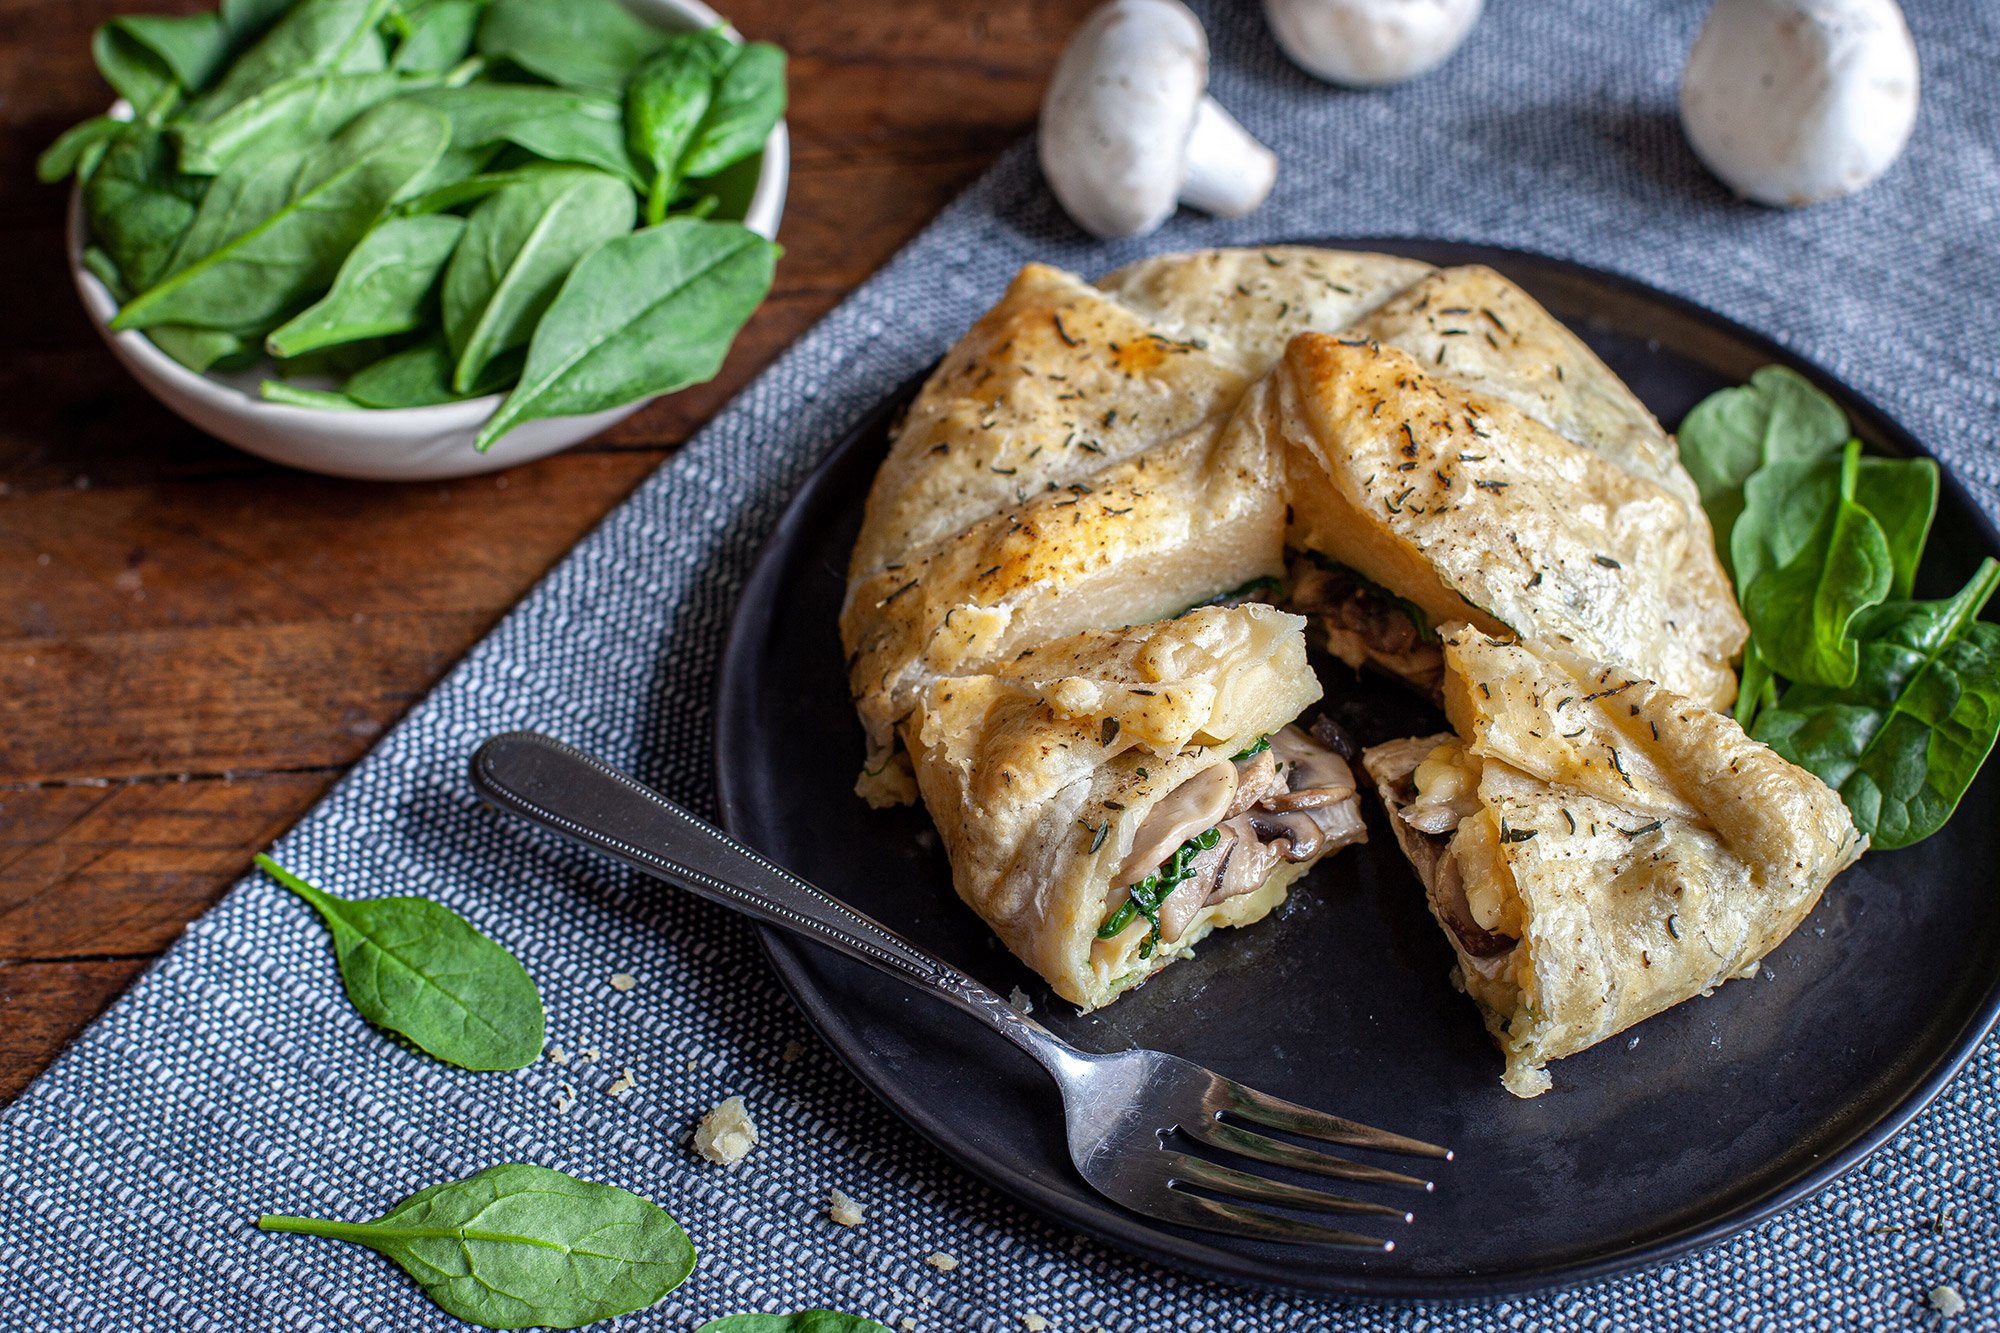 Recipe - Camembert Wellington with mushrooms and spinach